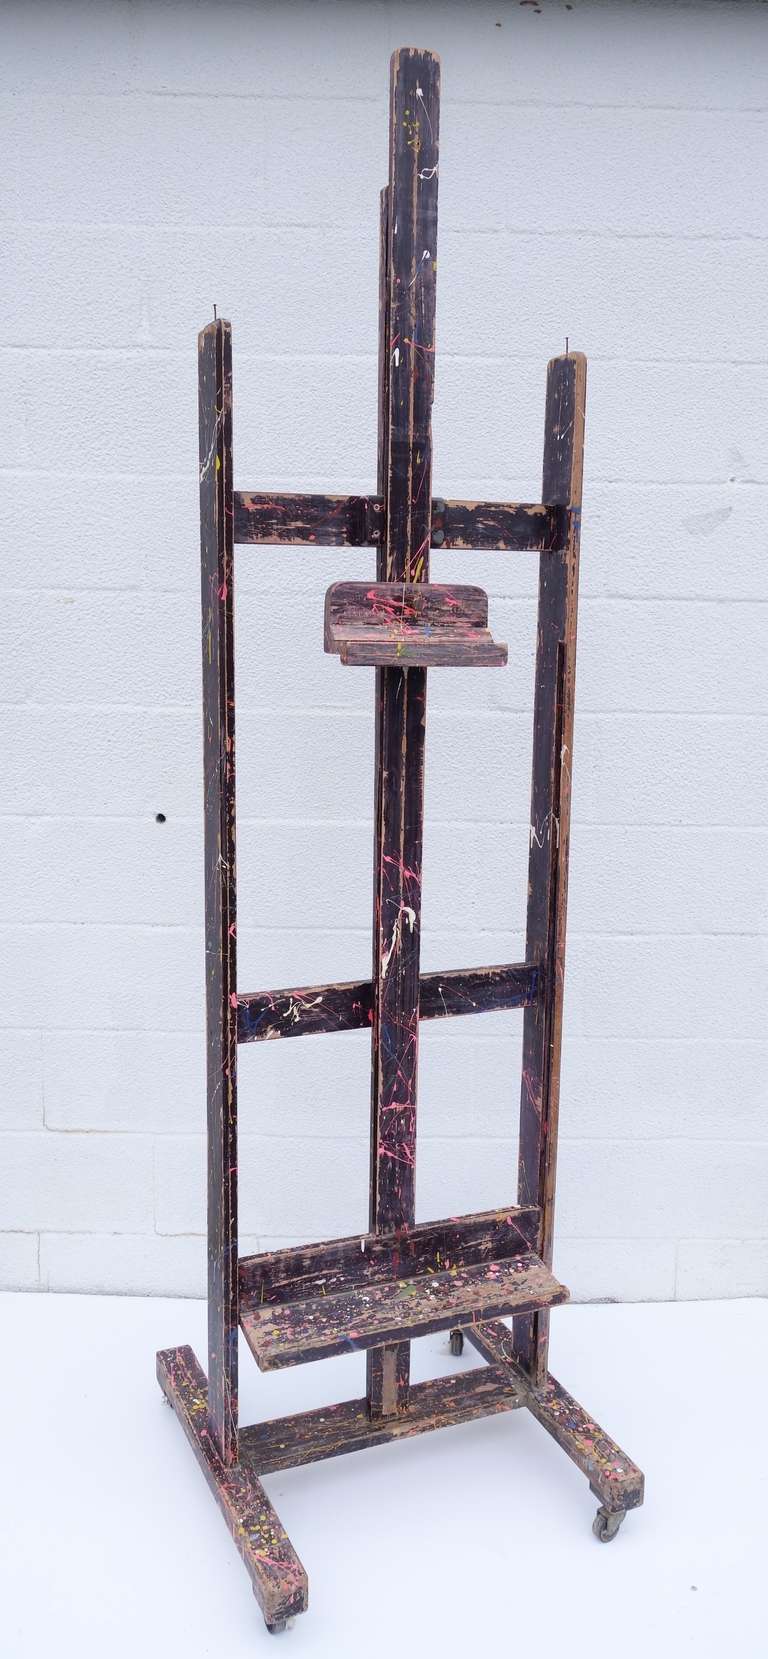 Painter's easel, complete with artist's paint splashes